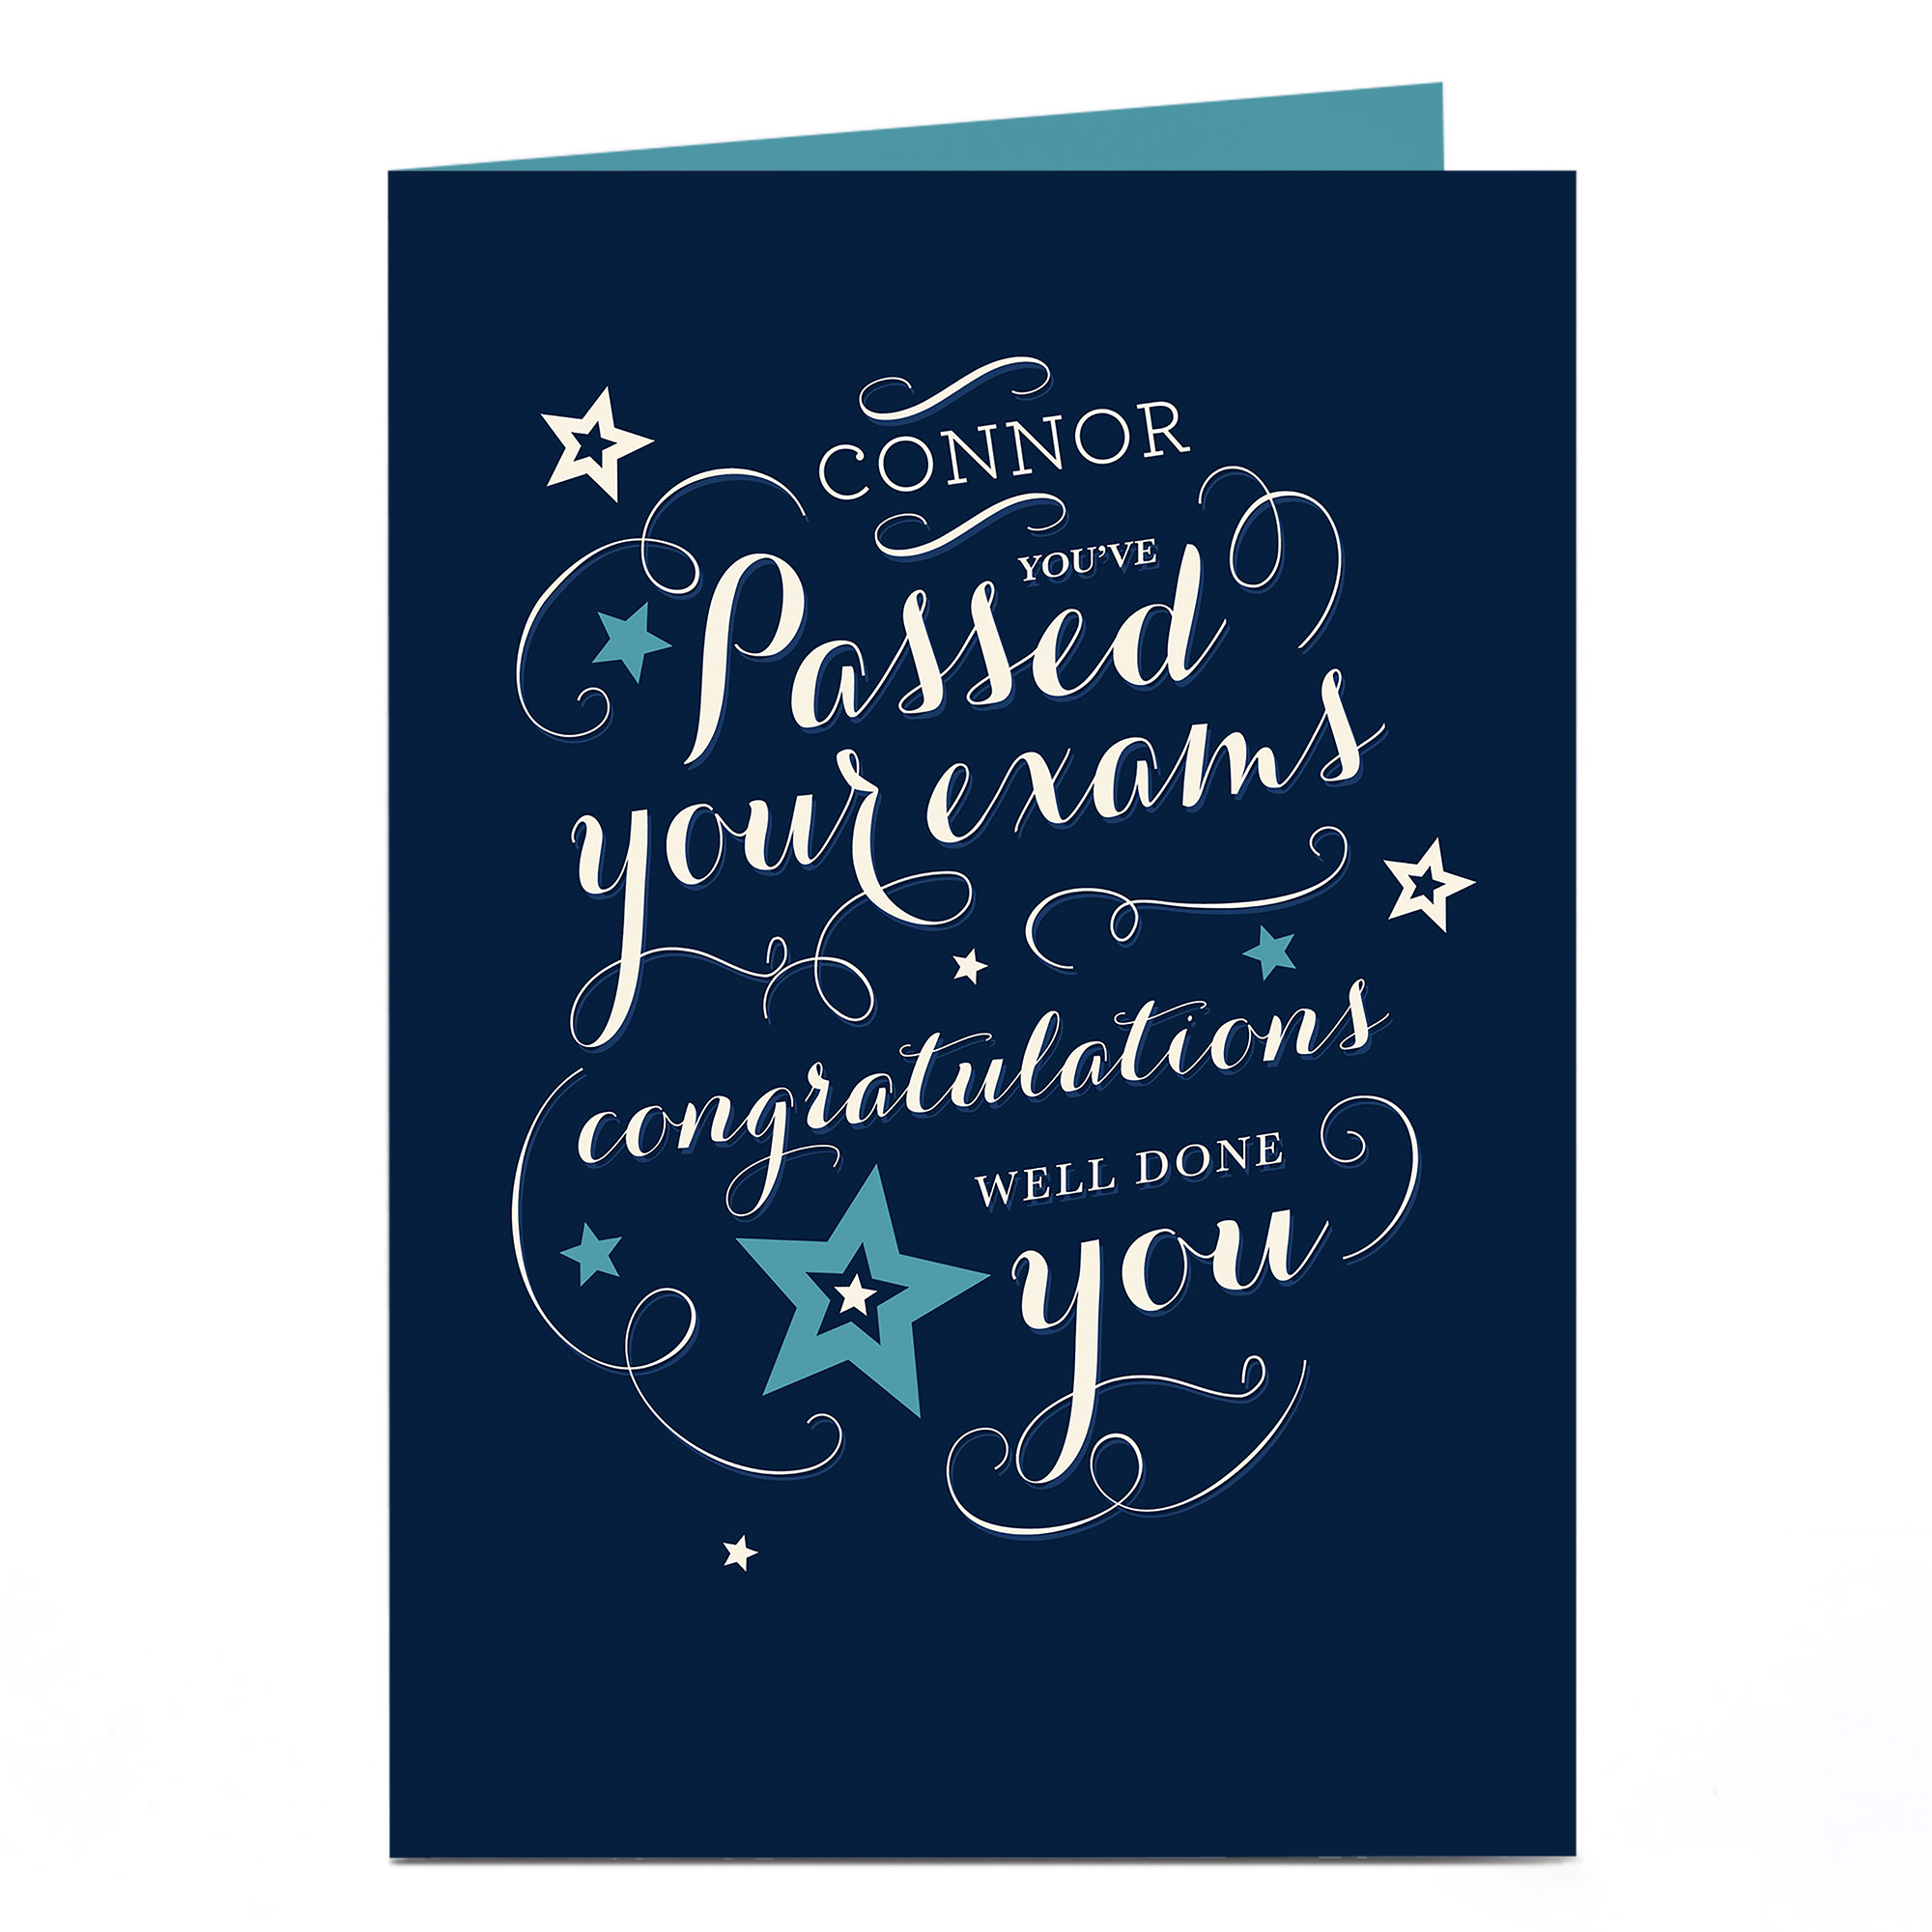 Personalised Congratulations Card - Passed Your Exams